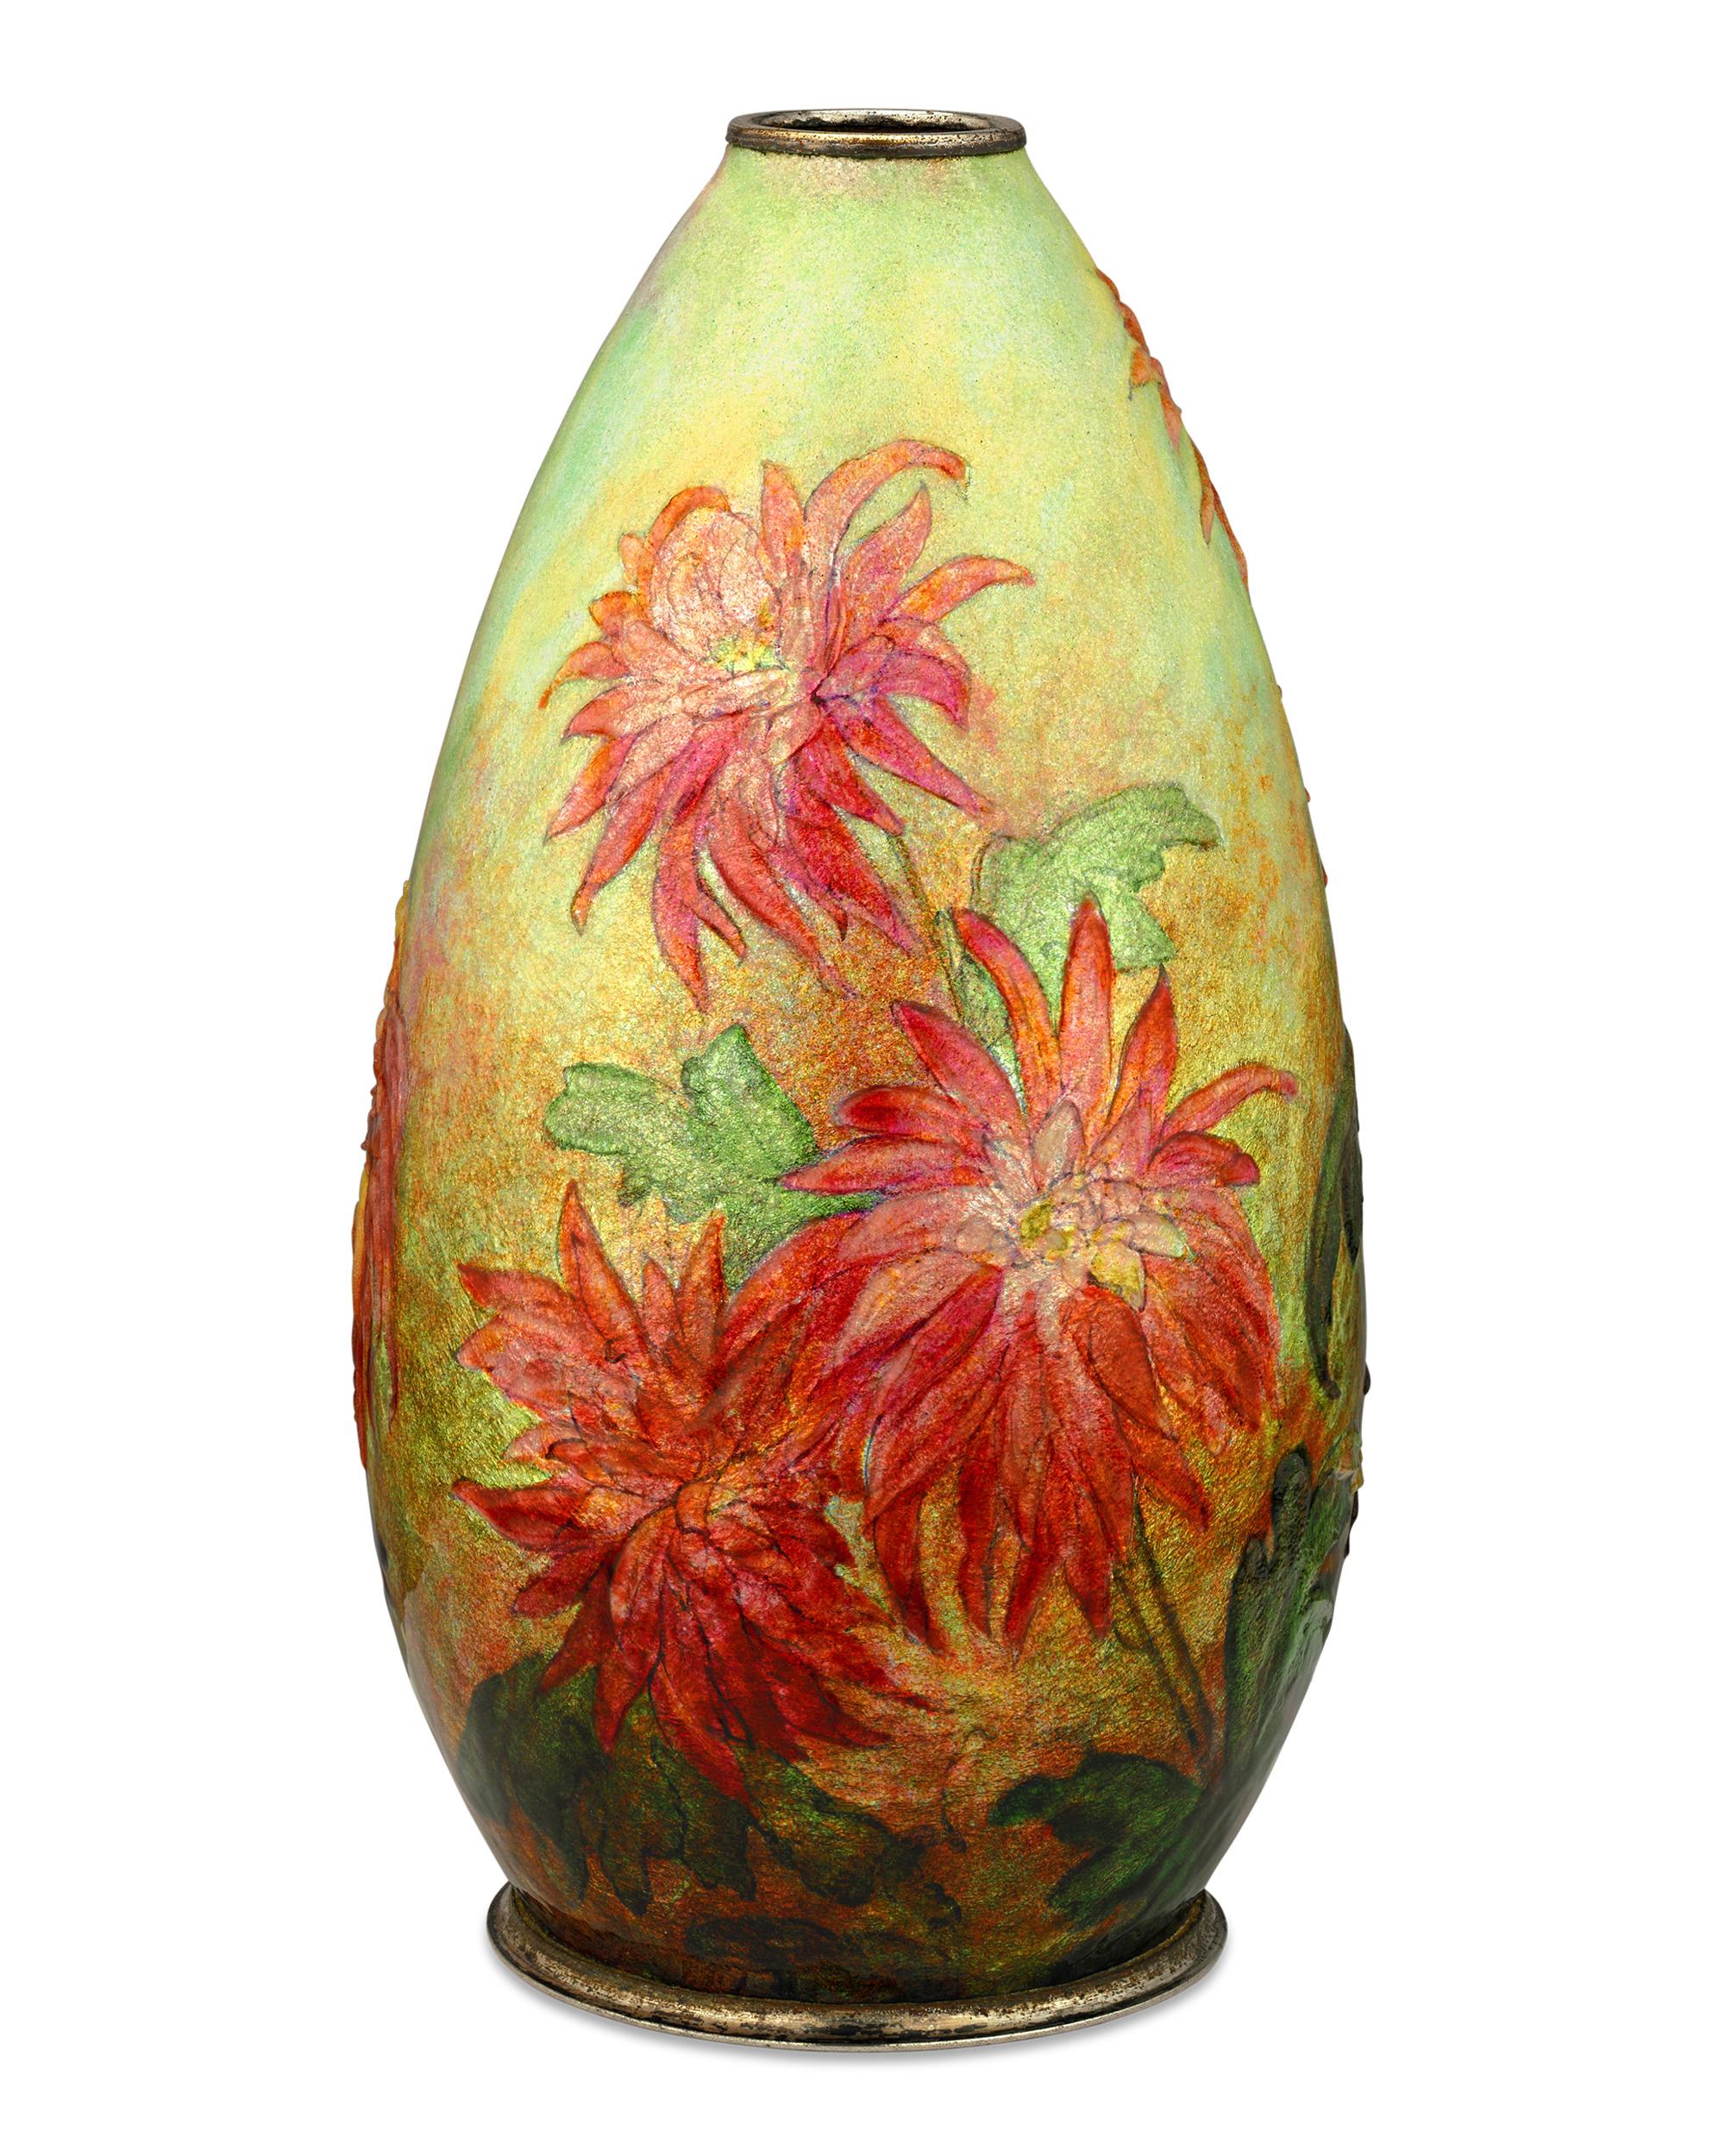 Delicate orange chrysanthemum flowers bloom in this enameled vase by Camille Fauré. Executed using his signature technique, the vase's copper form is covered in silver leaf and richly colored enamel that give Fauré's pieces their unique luster. A